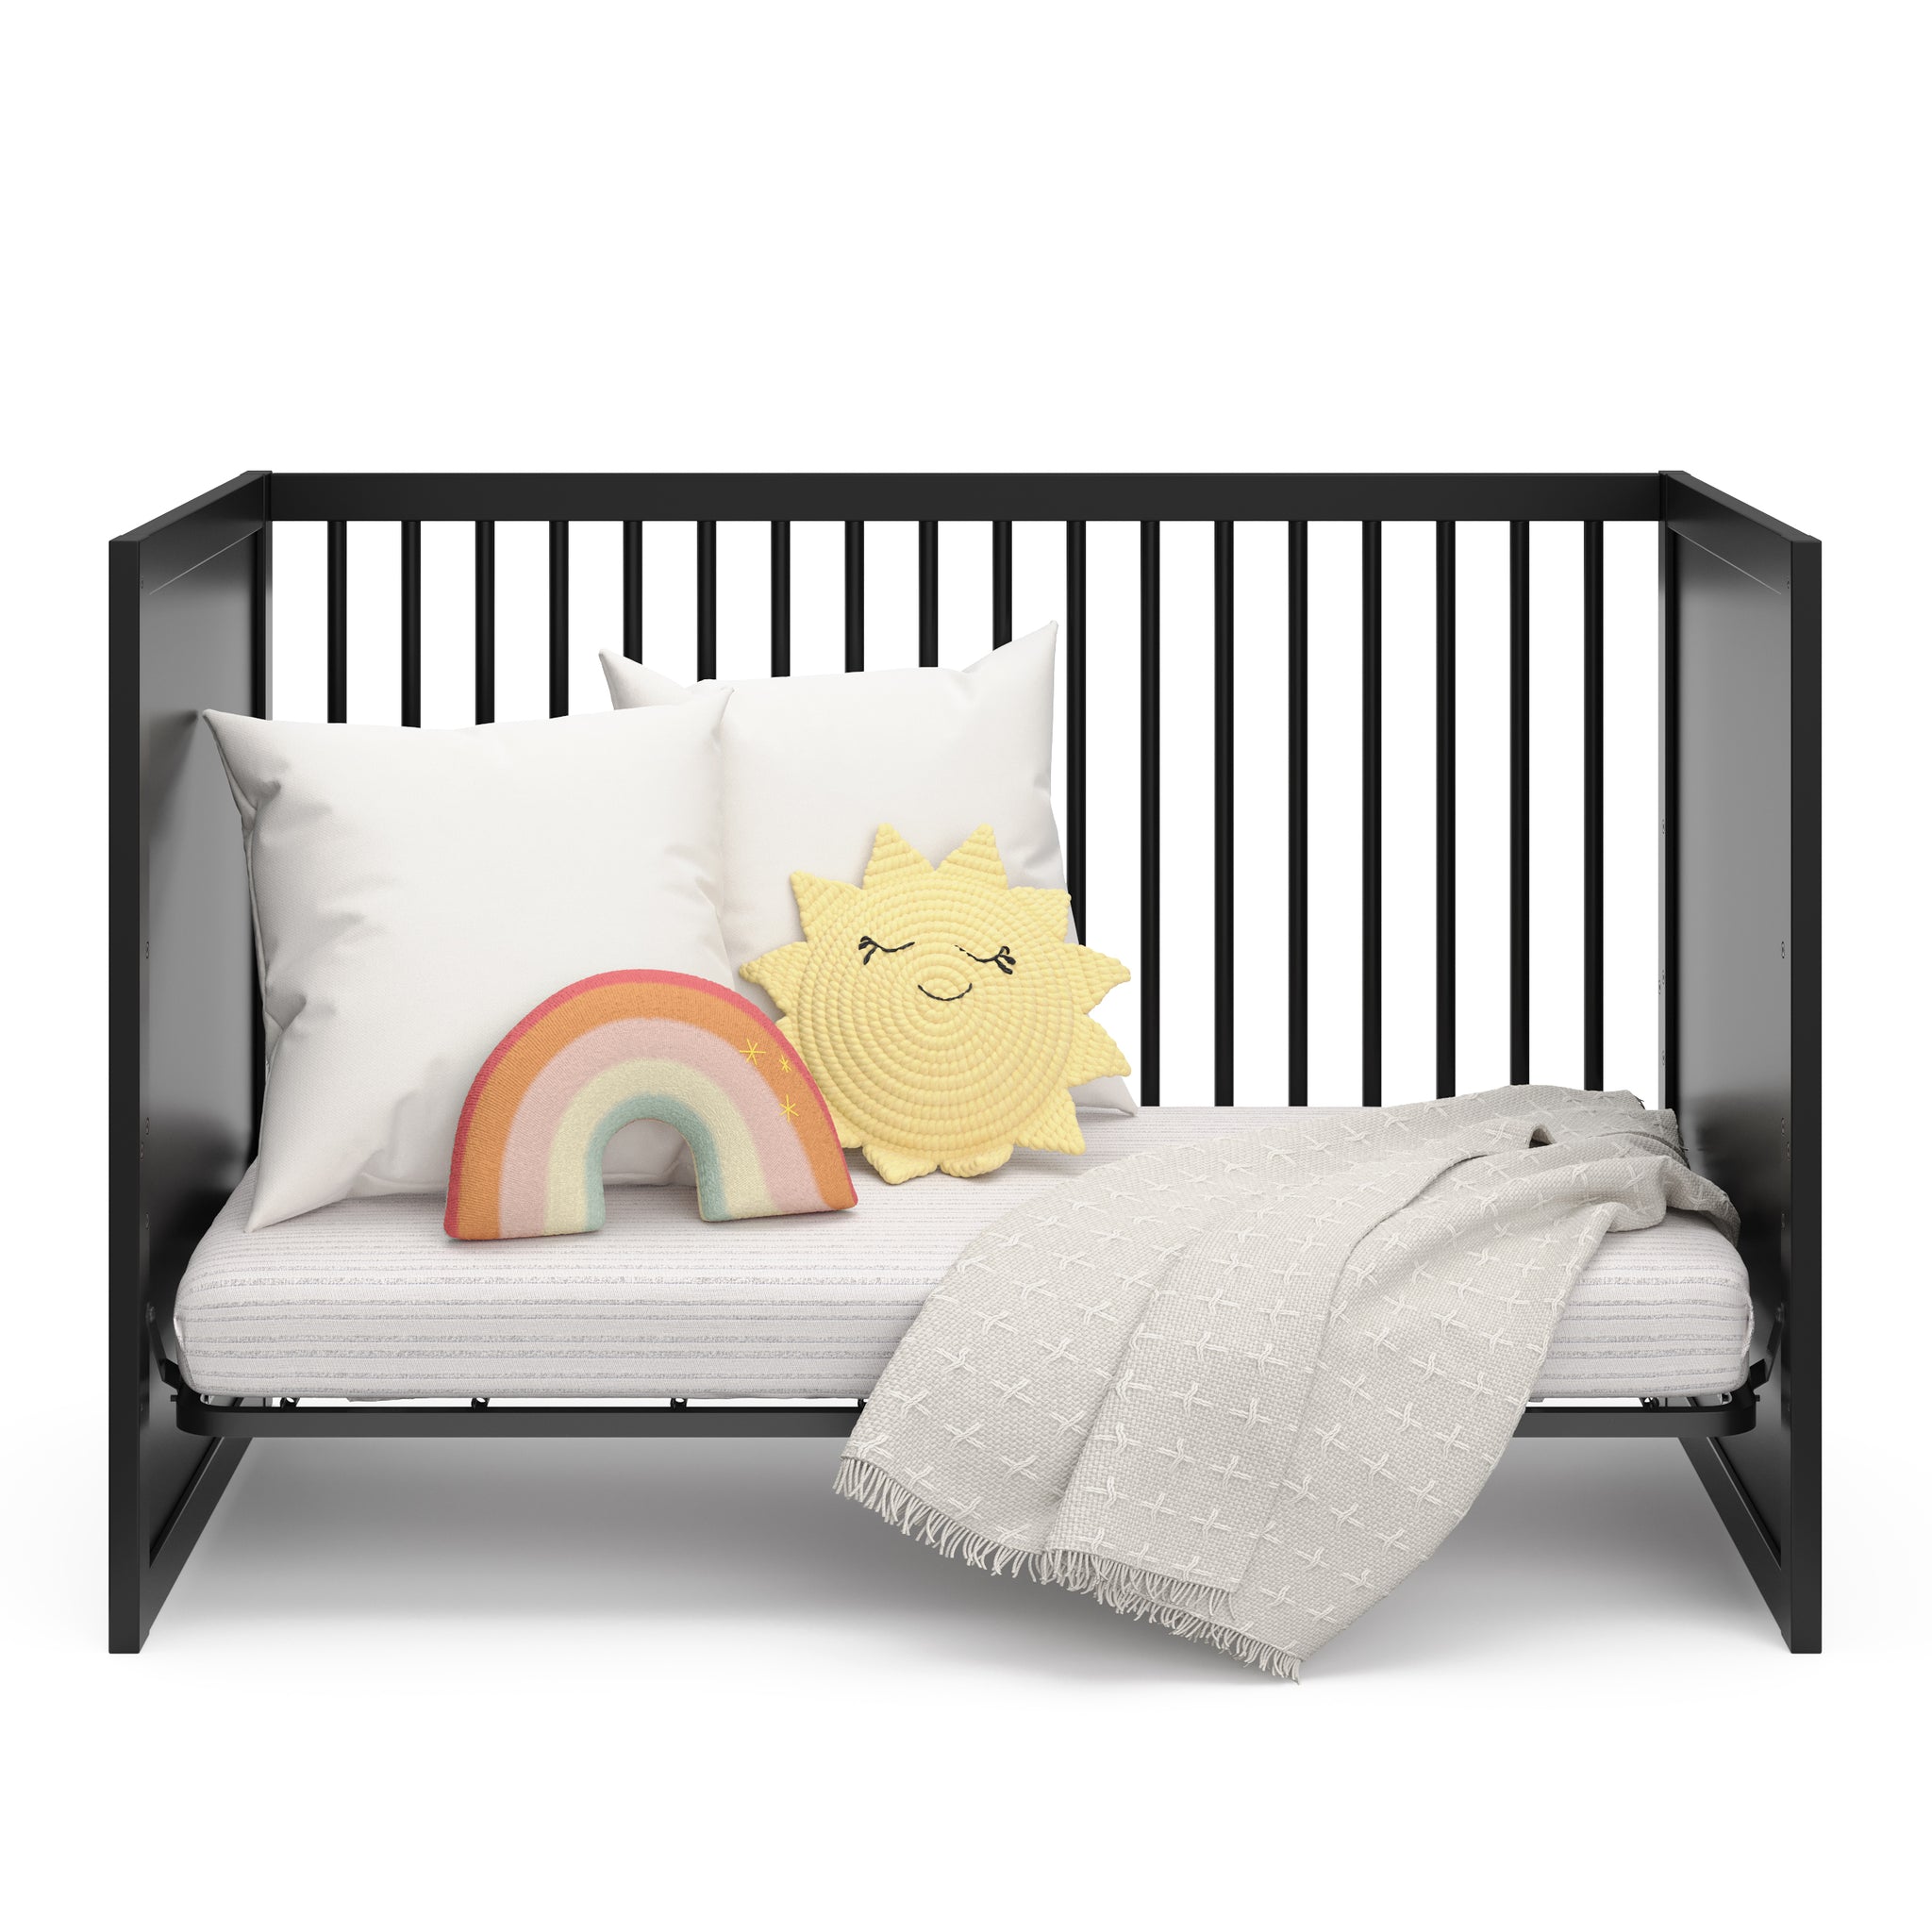 black crib in daybed bed conversion